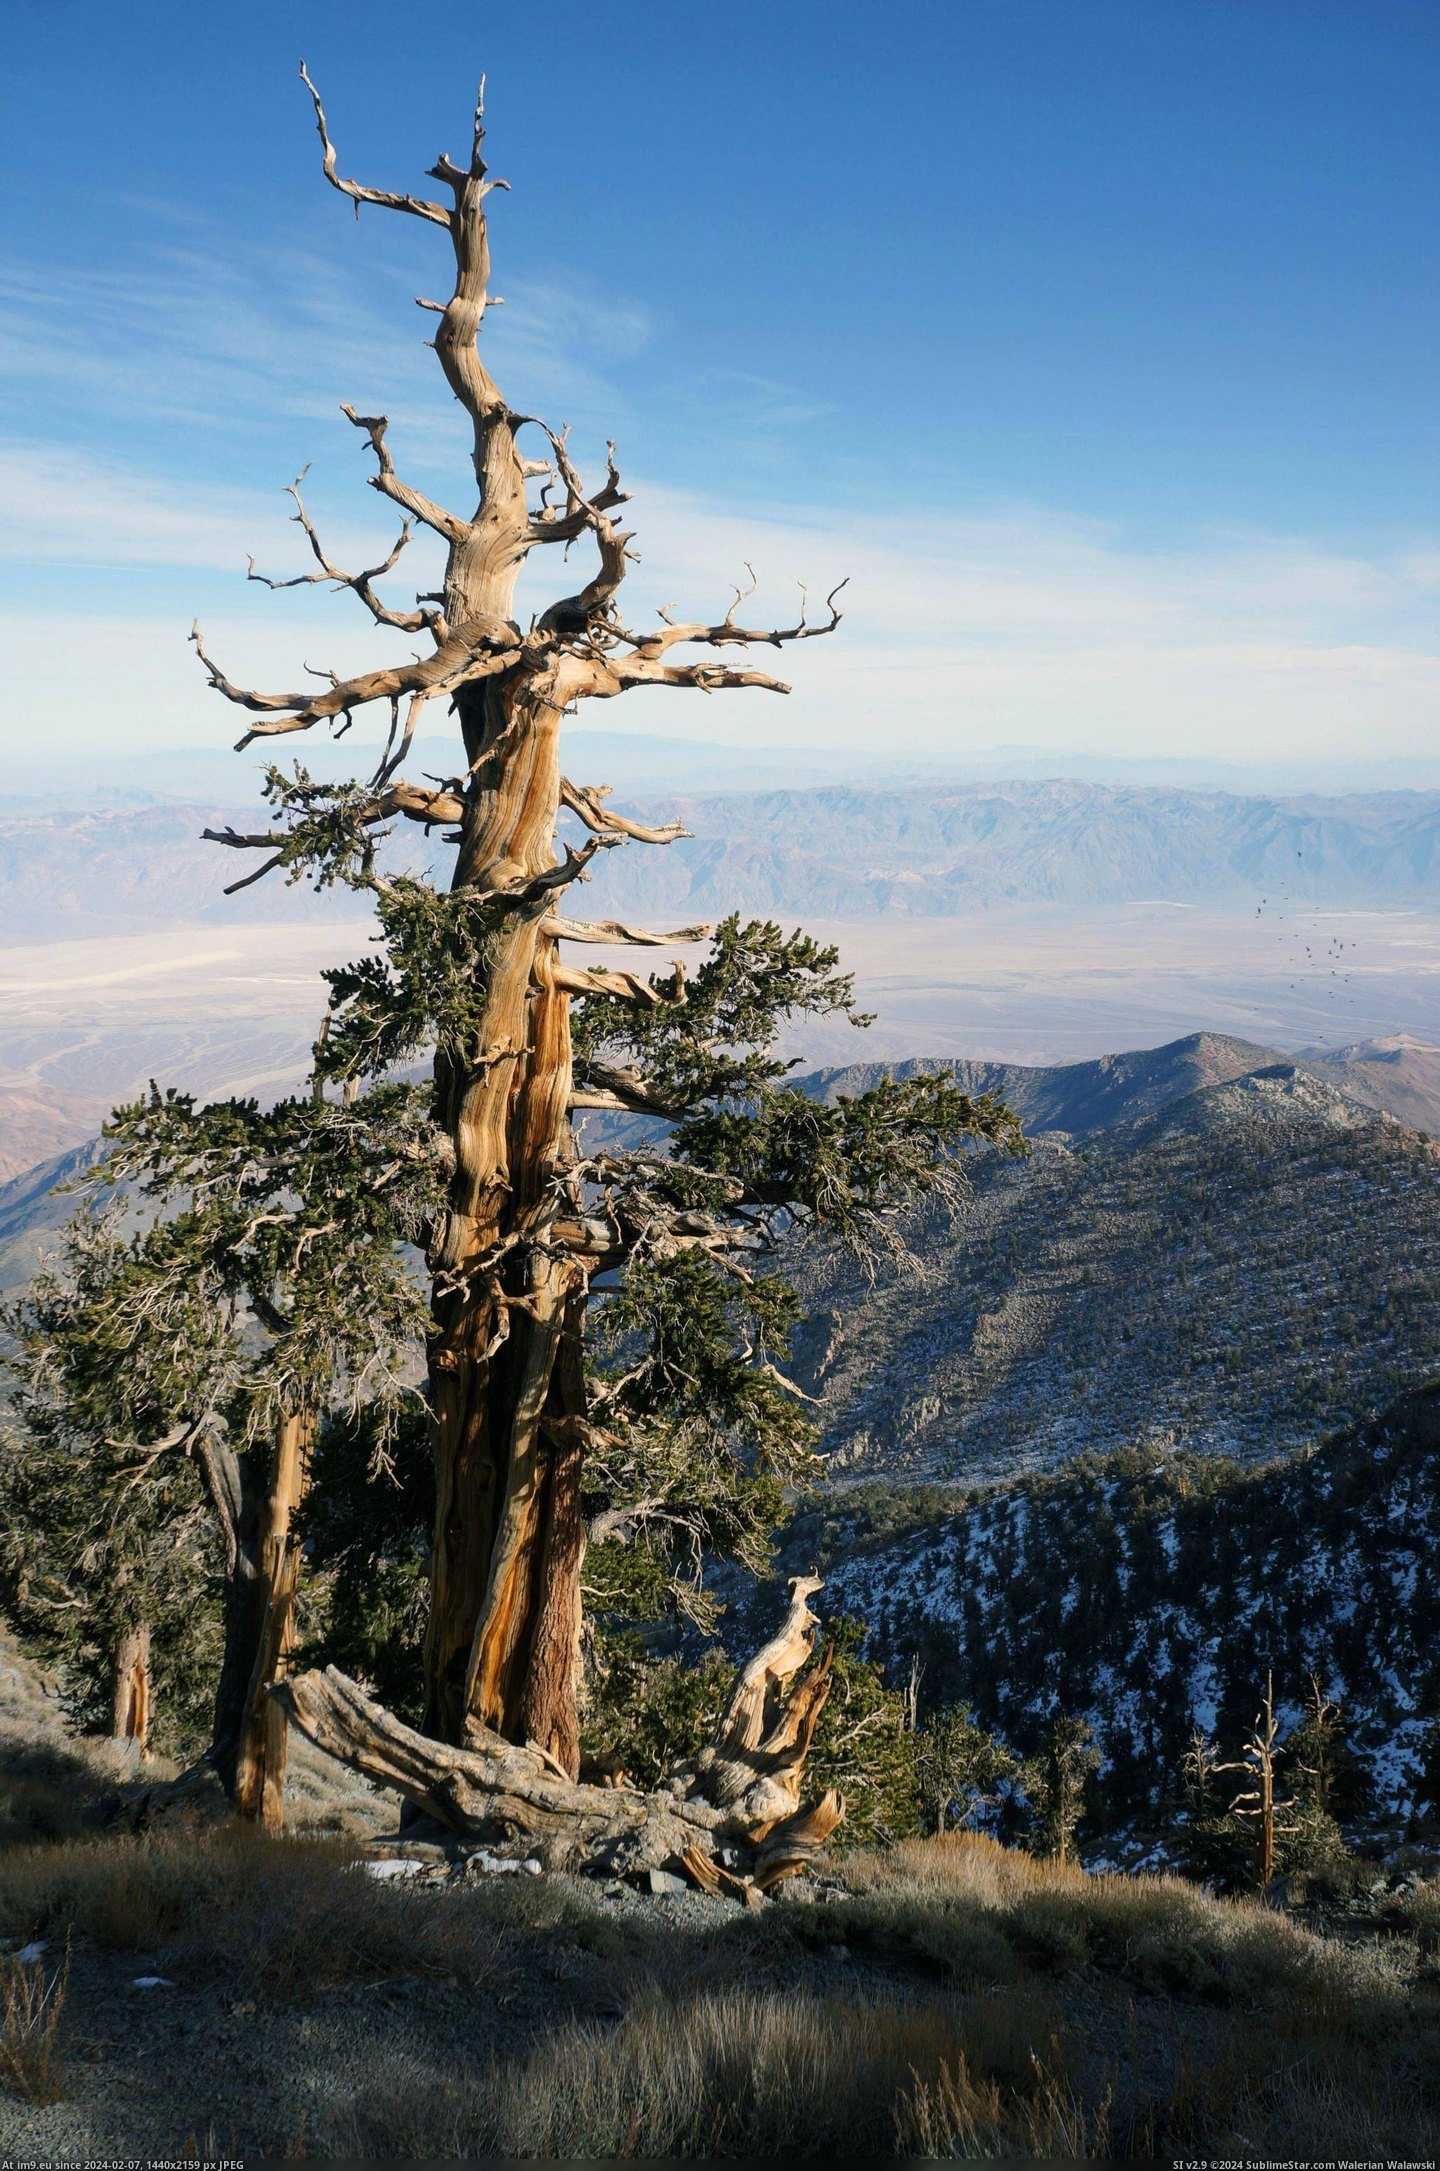 #California #Valley #Death #Pine #Bristlecone #Peak #Telescope #Ancient [Earthporn] Death Valley from Telescope Peak and an ancient Bristlecone Pine, California [OC] 2056x3094 Pic. (Изображение из альбом My r/EARTHPORN favs))